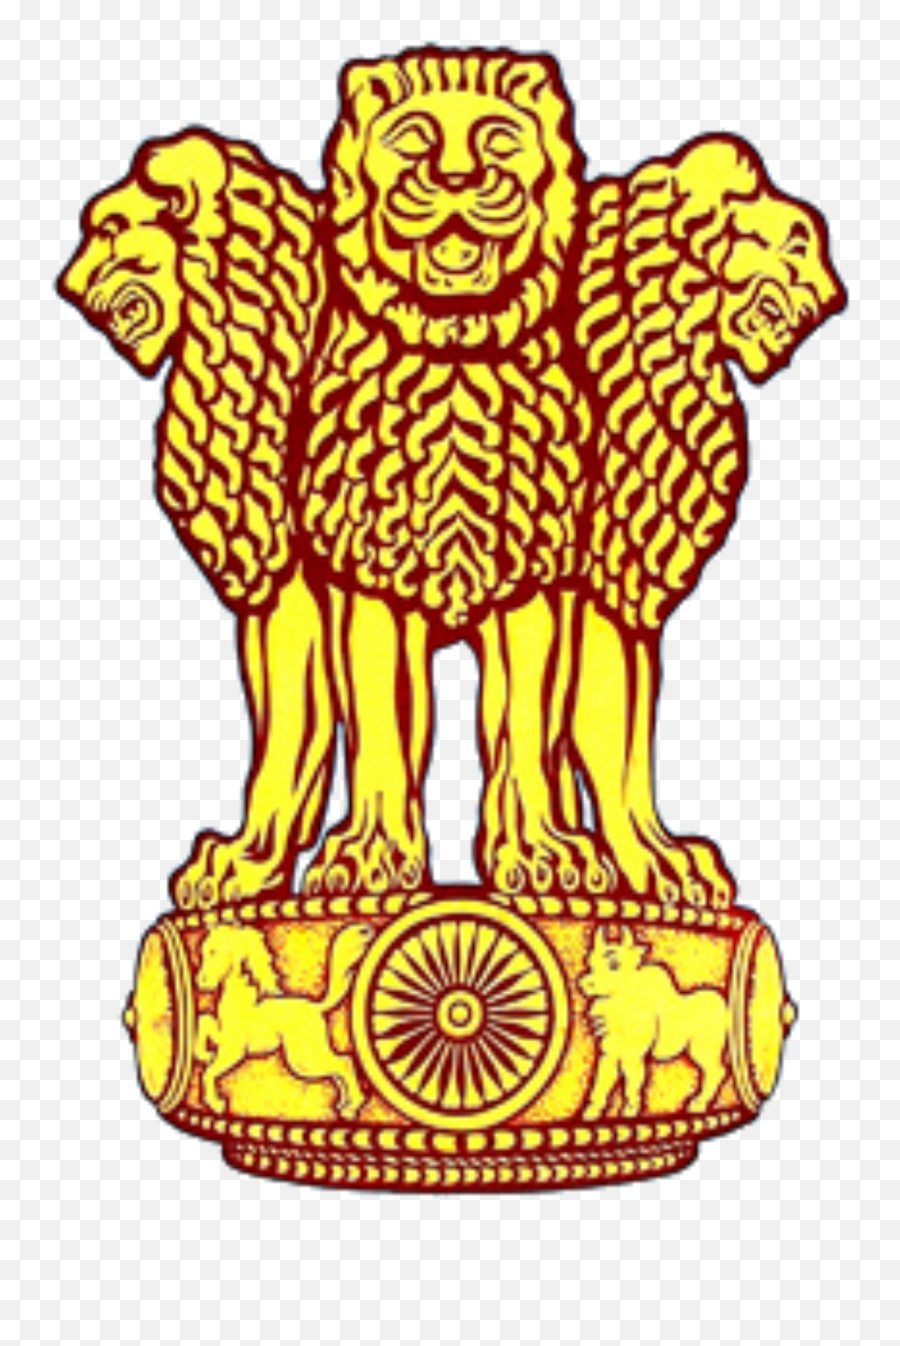 Coat Of Arms India Png - Govt Of India Logo,India Png